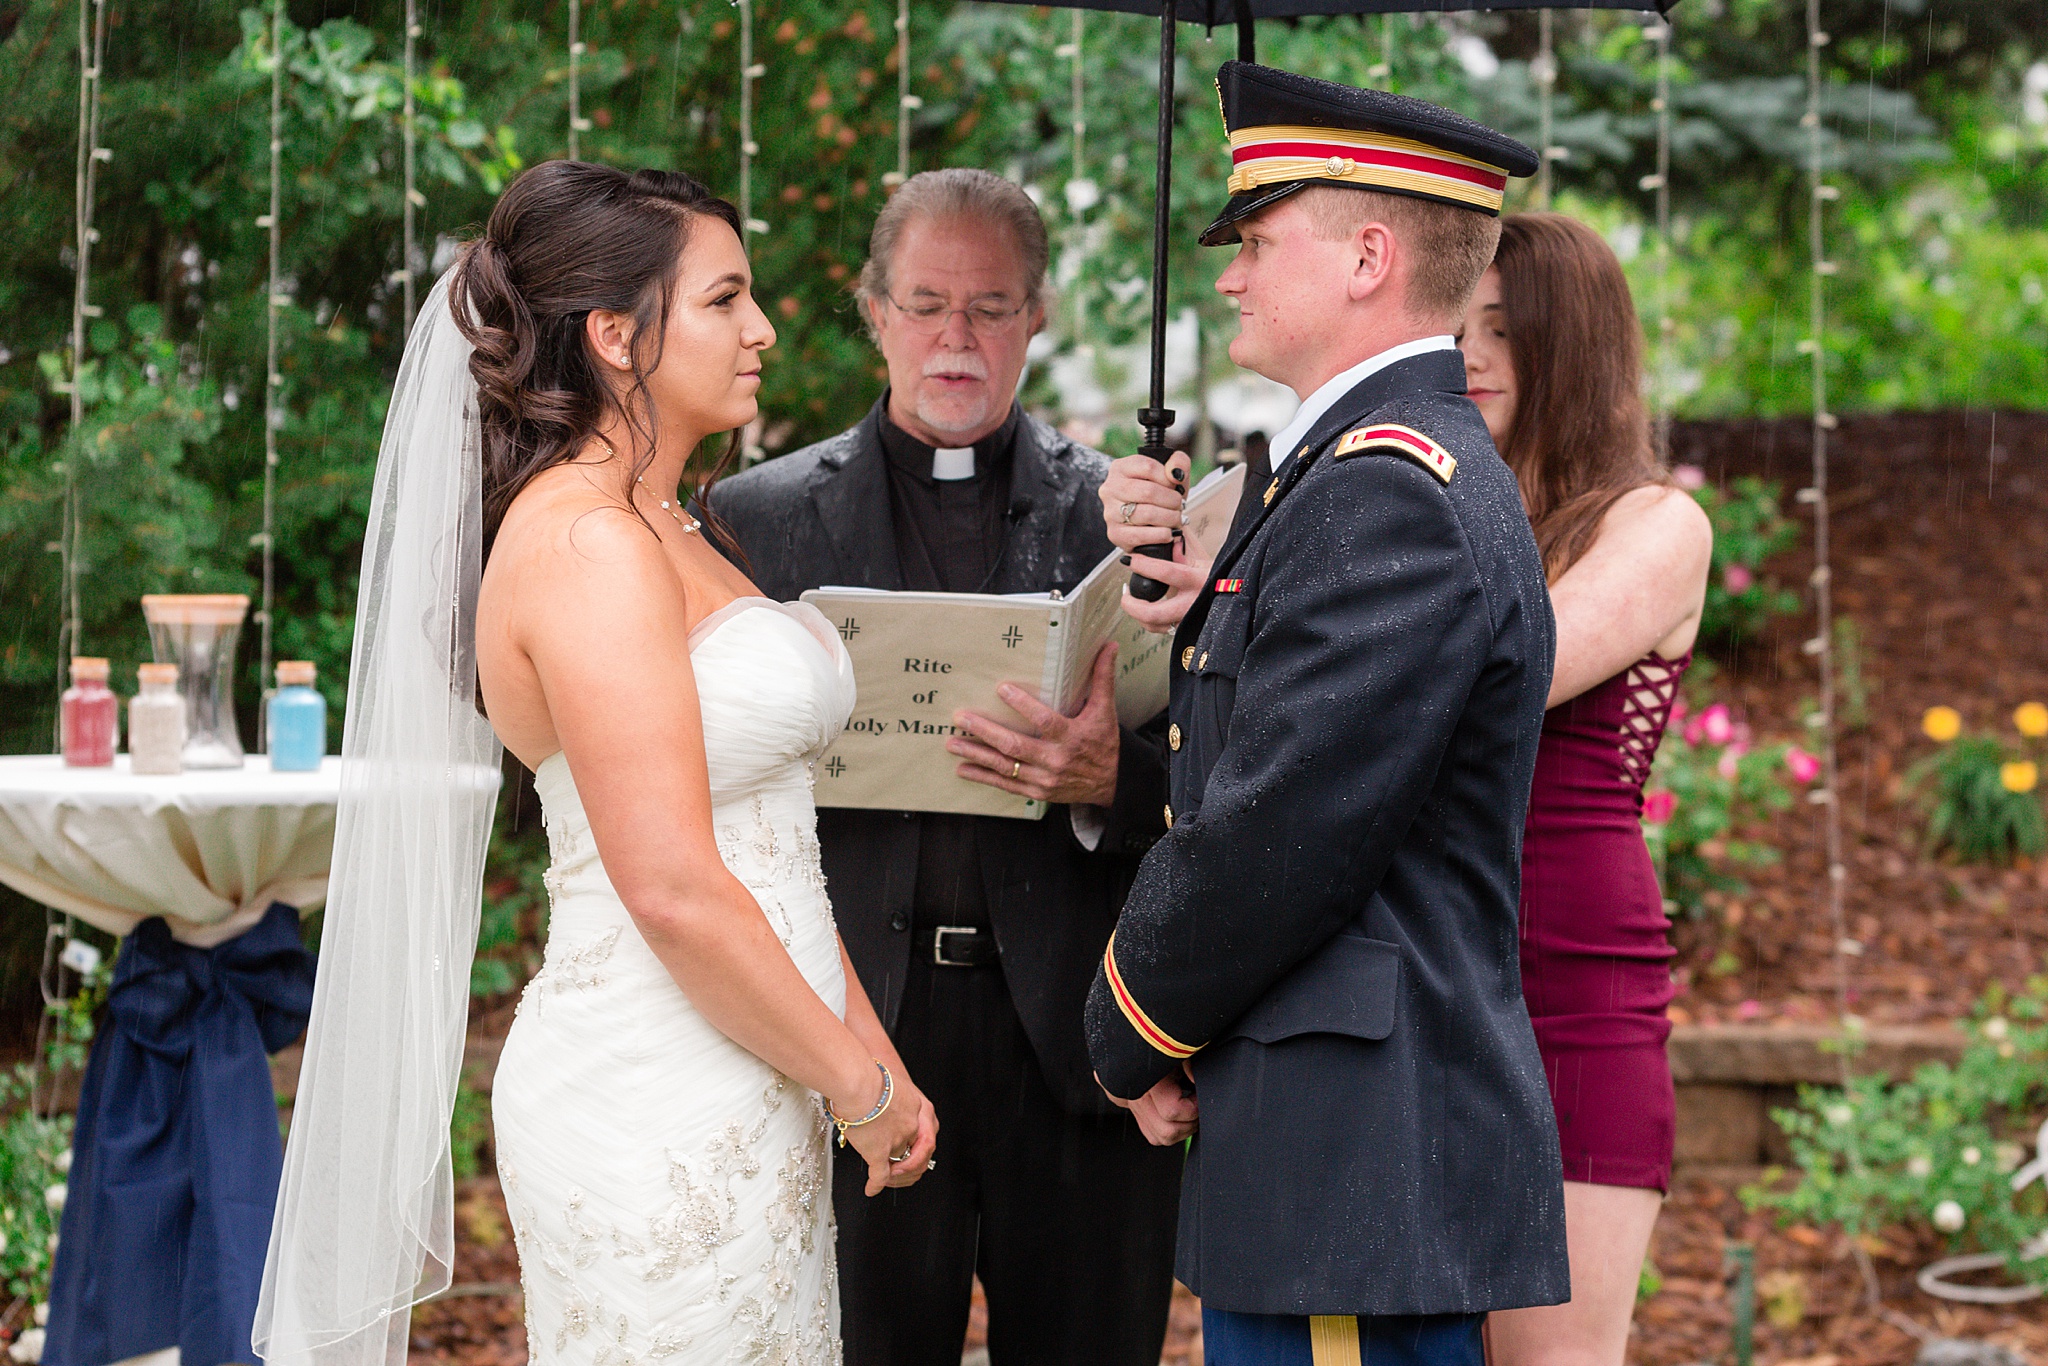 Bride & Groom exchanging vows during a rainy summer wedding. Tania & Chris' Denver Wedding at the Wedgewood Ken Caryl by Colorado Wedding Photography, Jennifer Garza. Colorado Wedding Photographer, Colorado Wedding Photography, Denver Wedding Photographer, Denver Wedding Photography, US Marine Corp Wedding, US Marine Corp, Military Wedding, US Marines, Wedgewood Weddings, Wedgewood Weddings Ken Caryl, Colorado Wedding, Denver Wedding, Wedding Photographer, Colorado Bride, Brides of Colorado